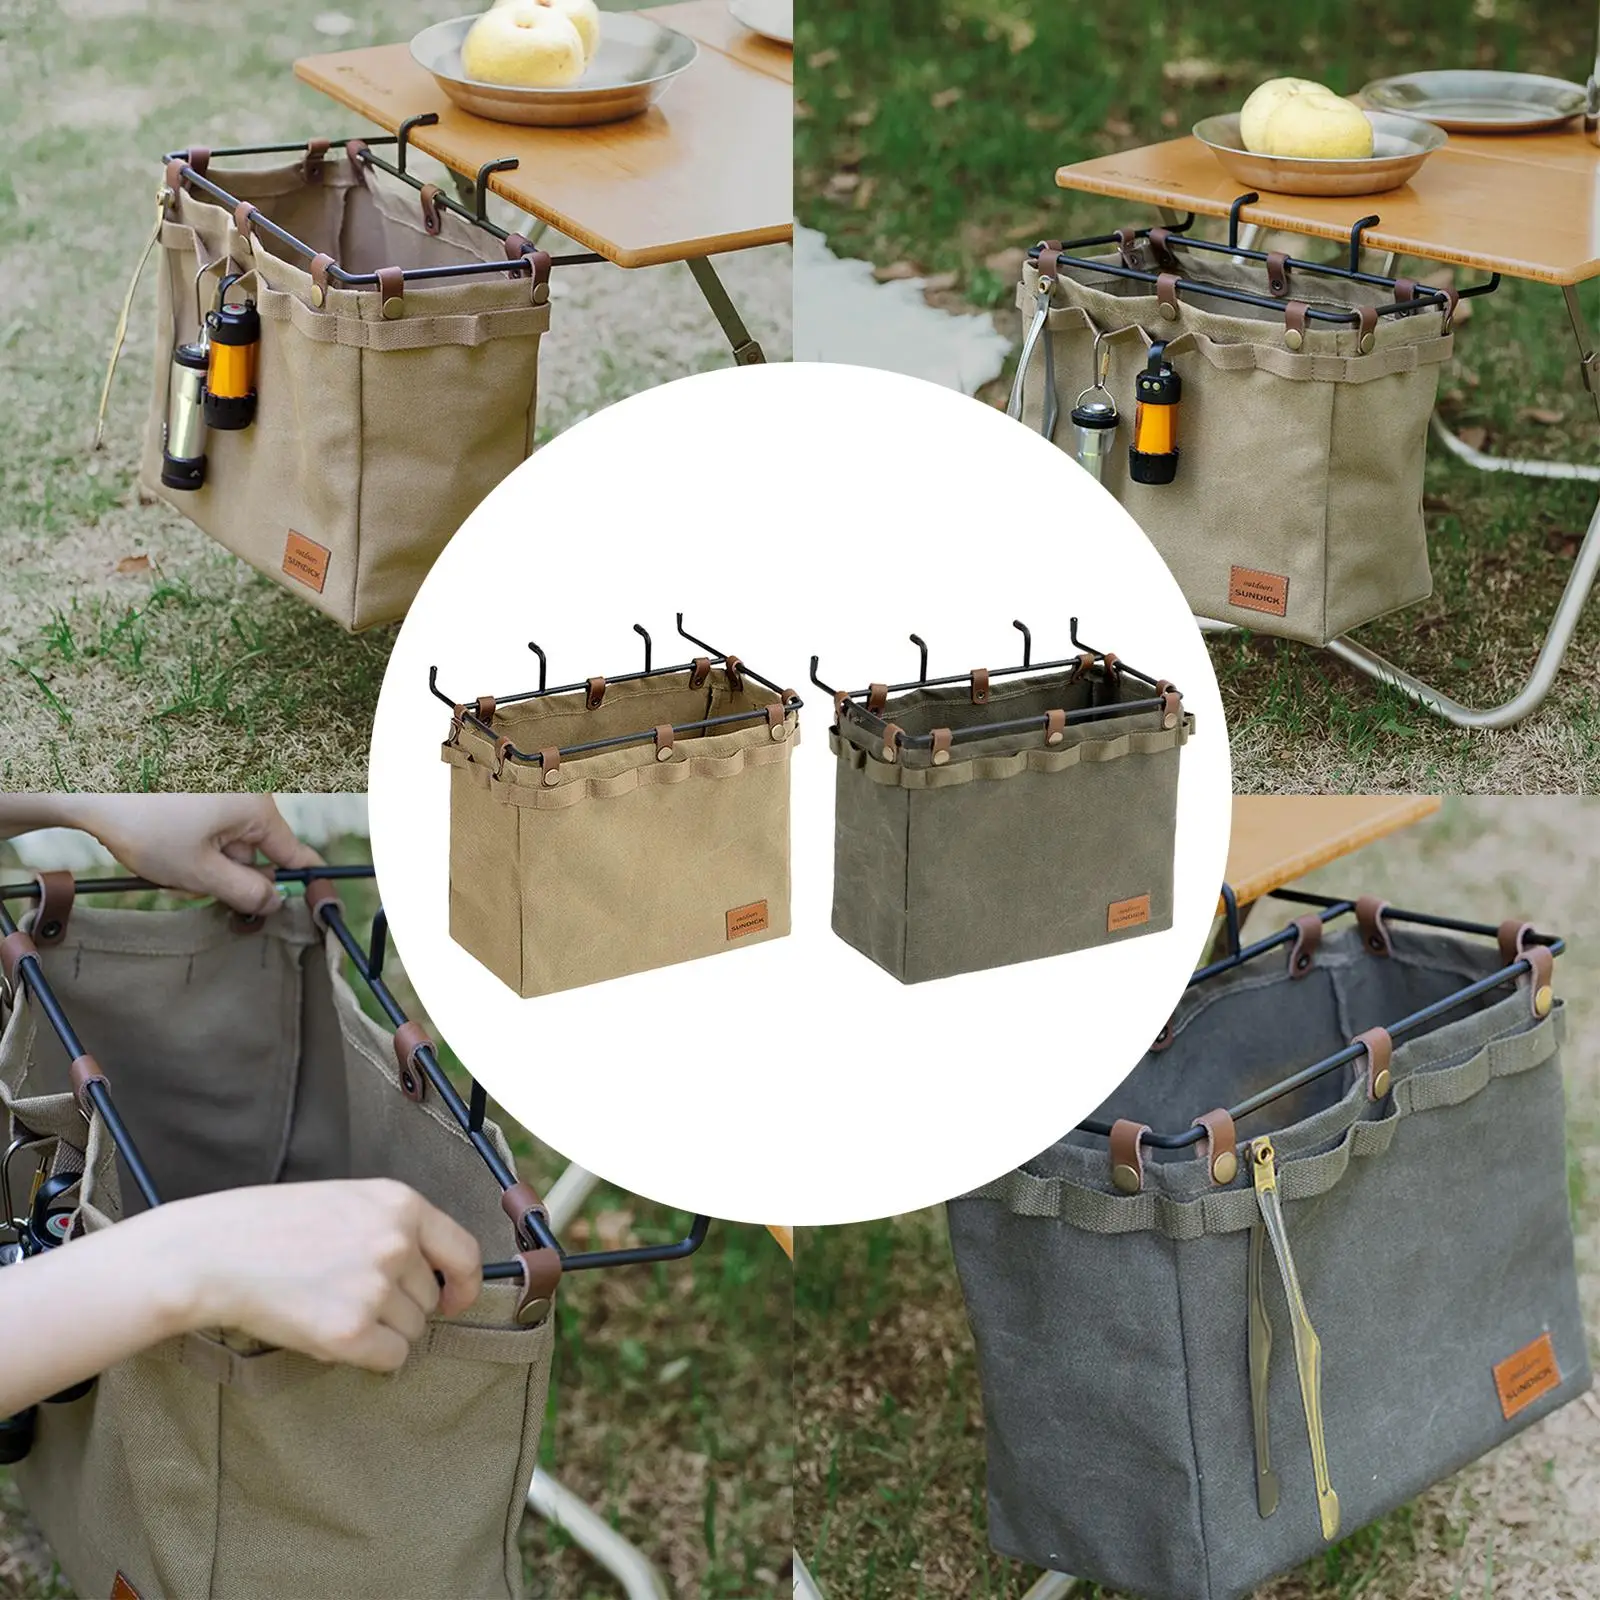 Camping Storage Bag Hanging Side Bag Holder for Outdoor BBQ Grill Tool Table